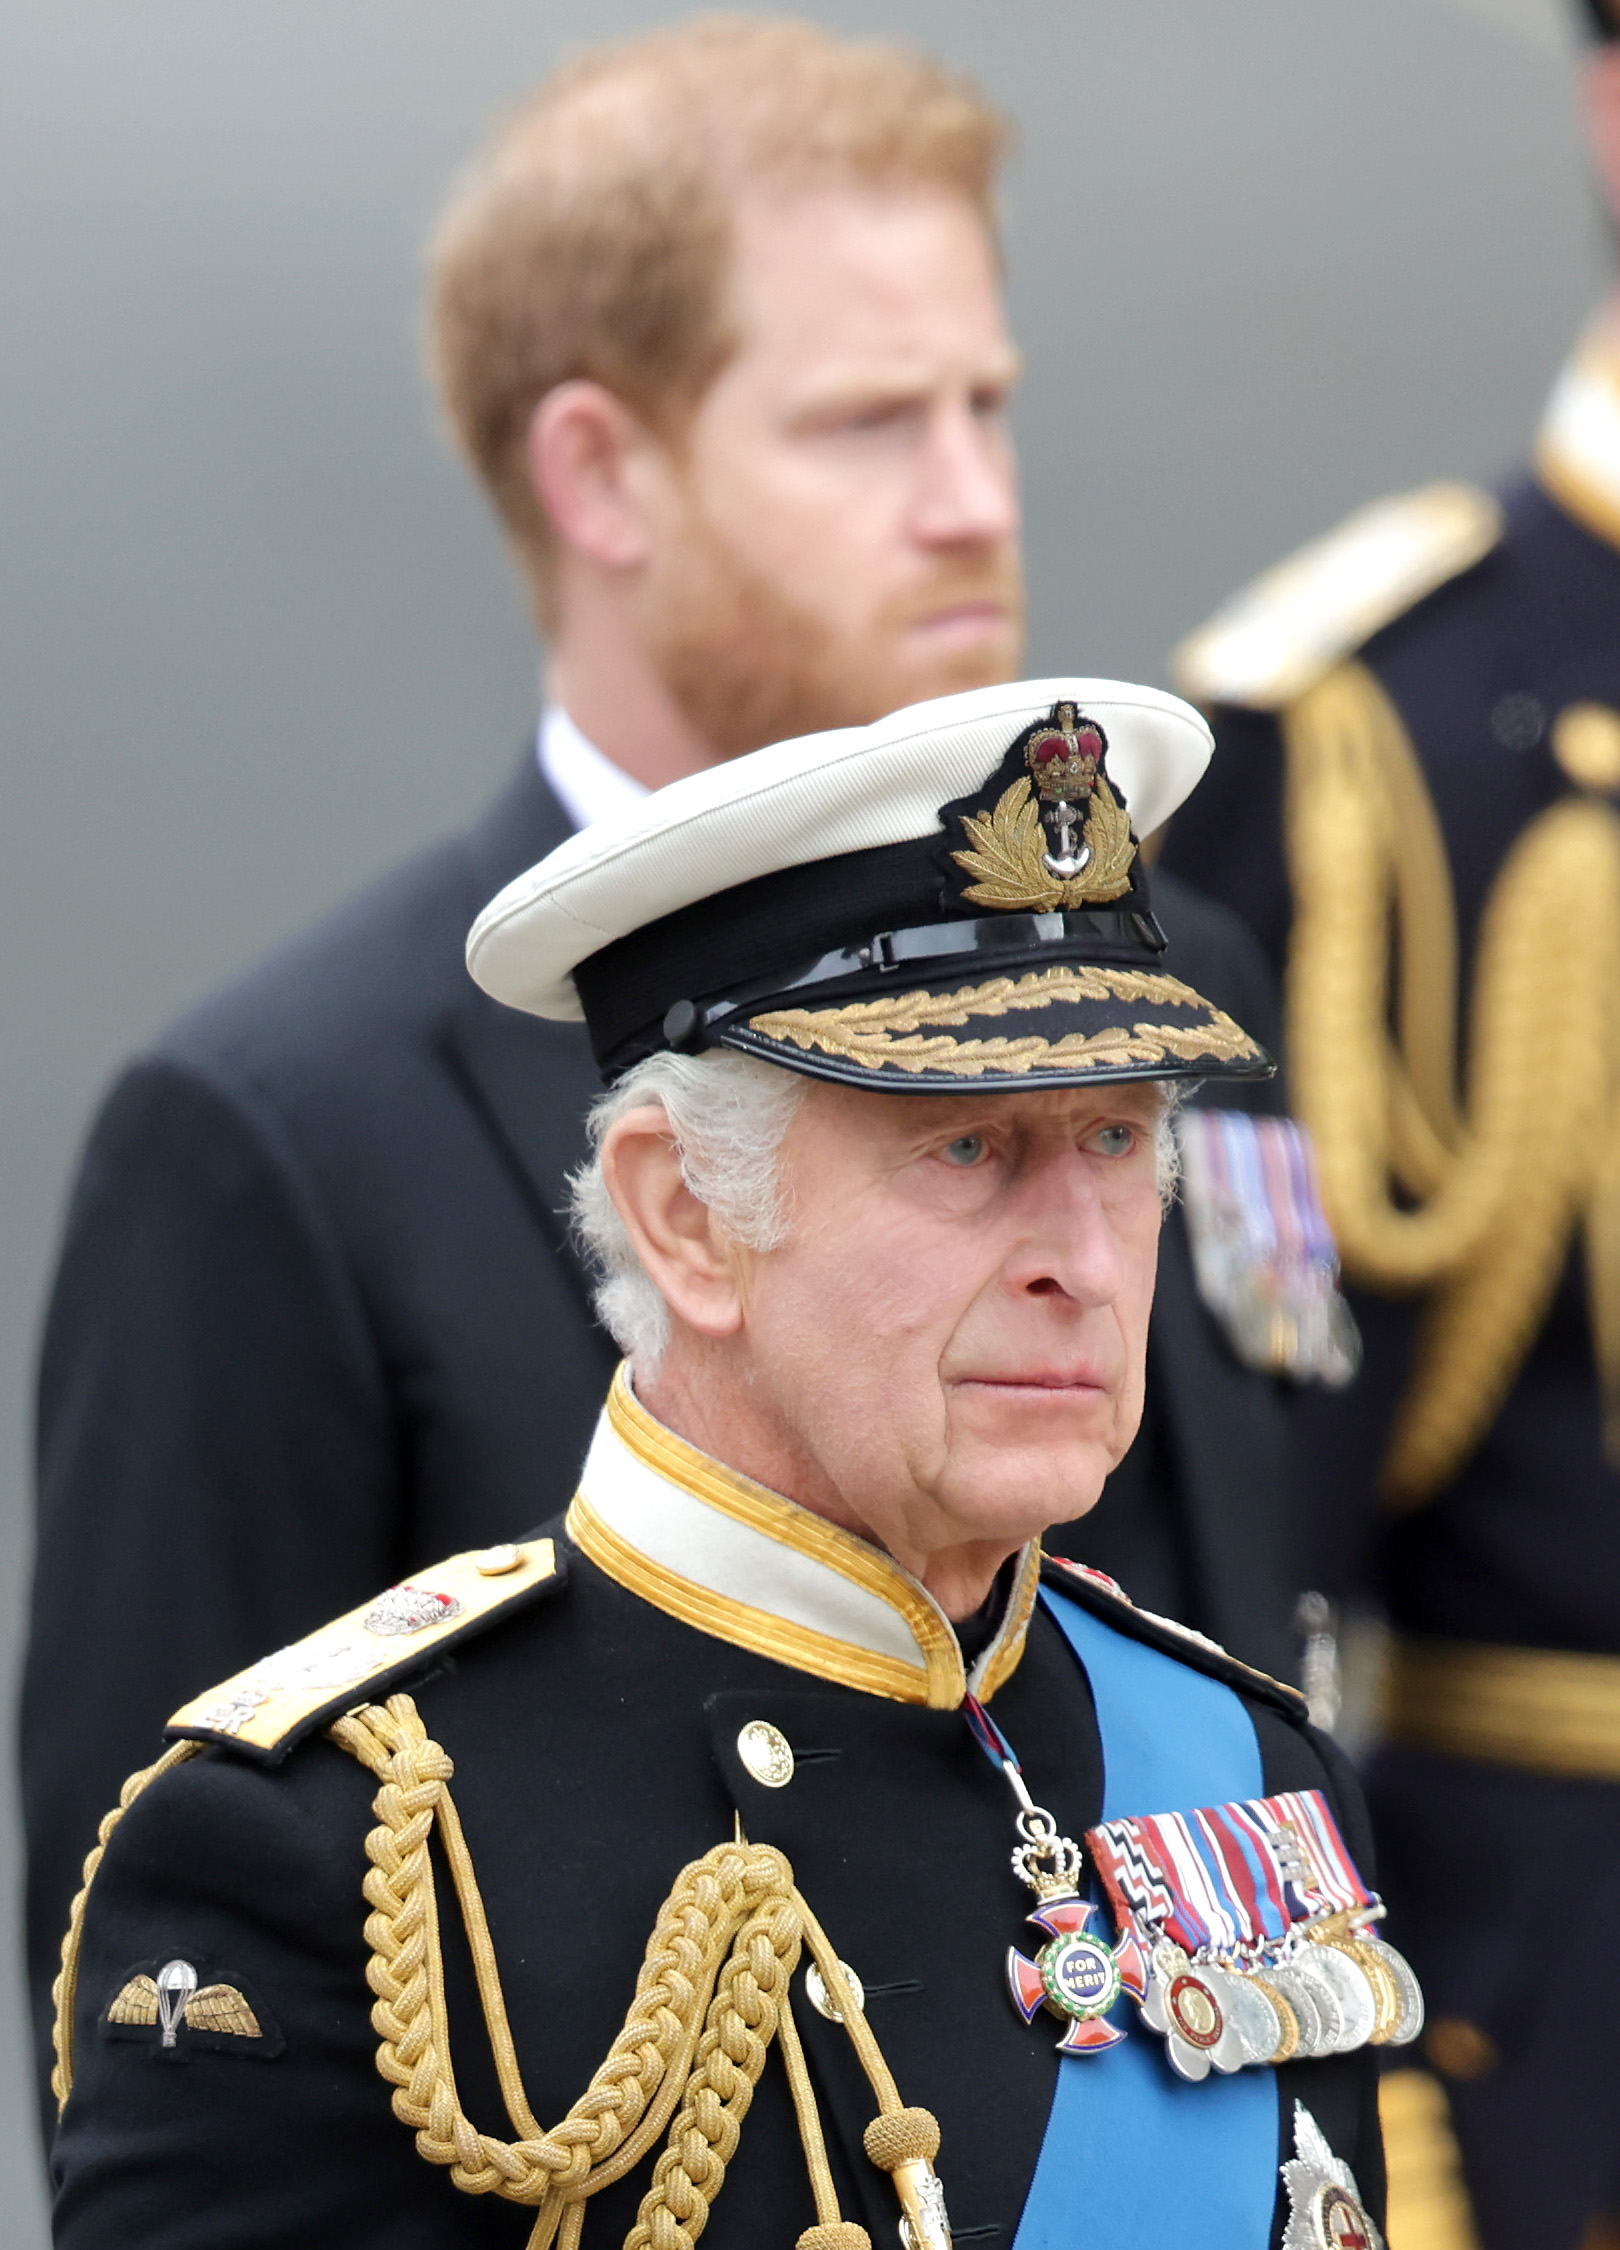 King Charles III and Prince Harry at the State Funeral Of Queen Elizabeth II in London, England on September 19, 2022 | Source: Getty Images